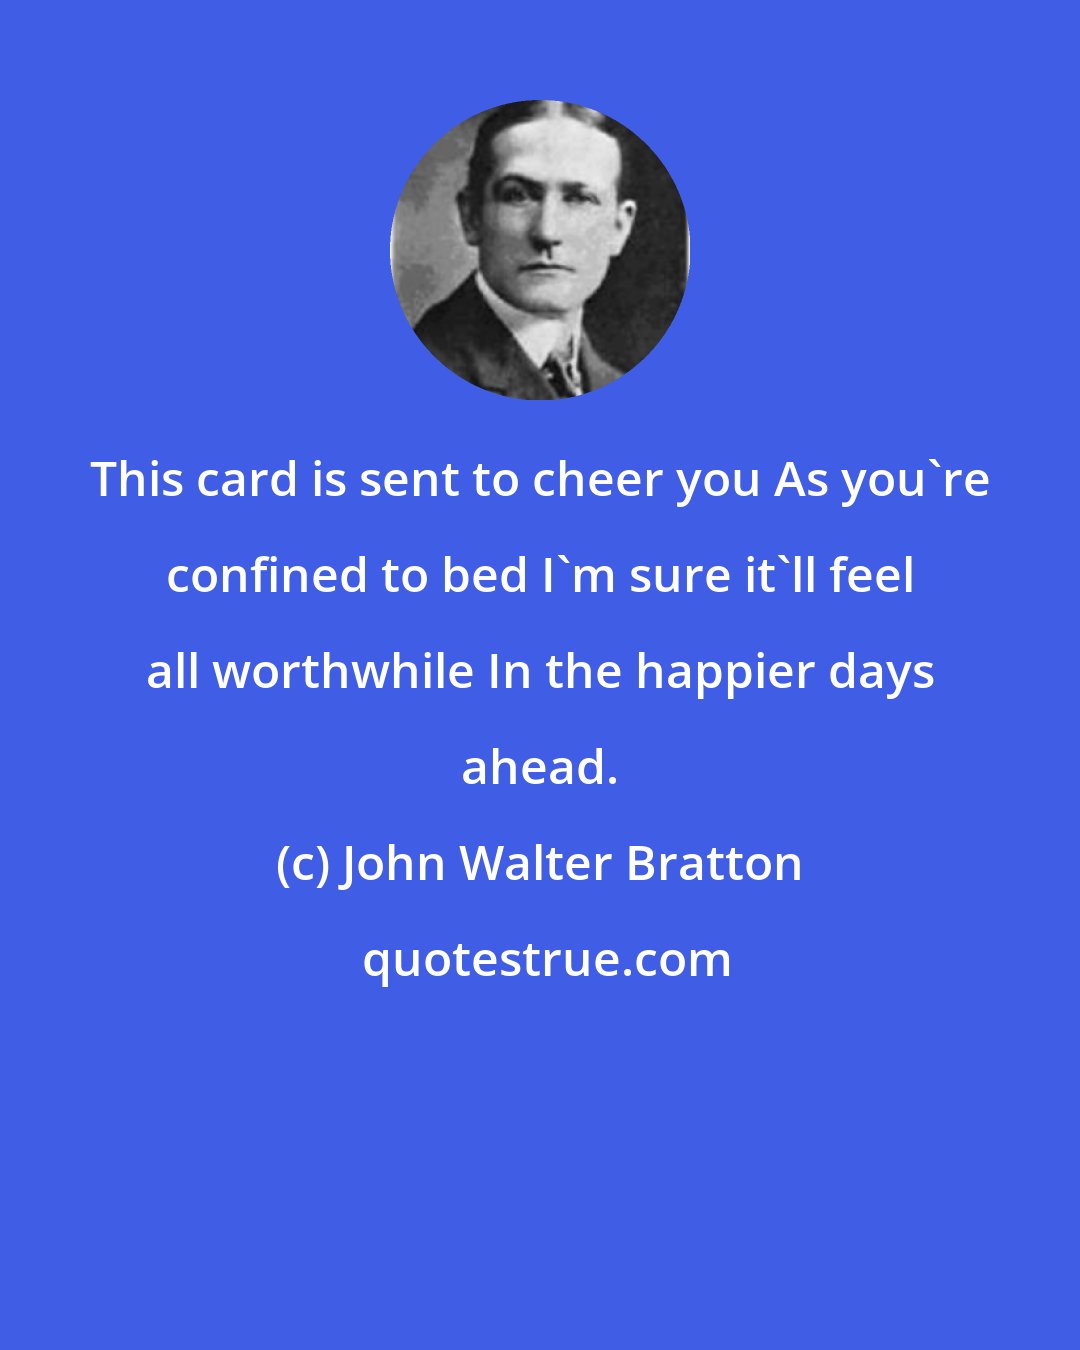 John Walter Bratton: This card is sent to cheer you As you're confined to bed I'm sure it'll feel all worthwhile In the happier days ahead.